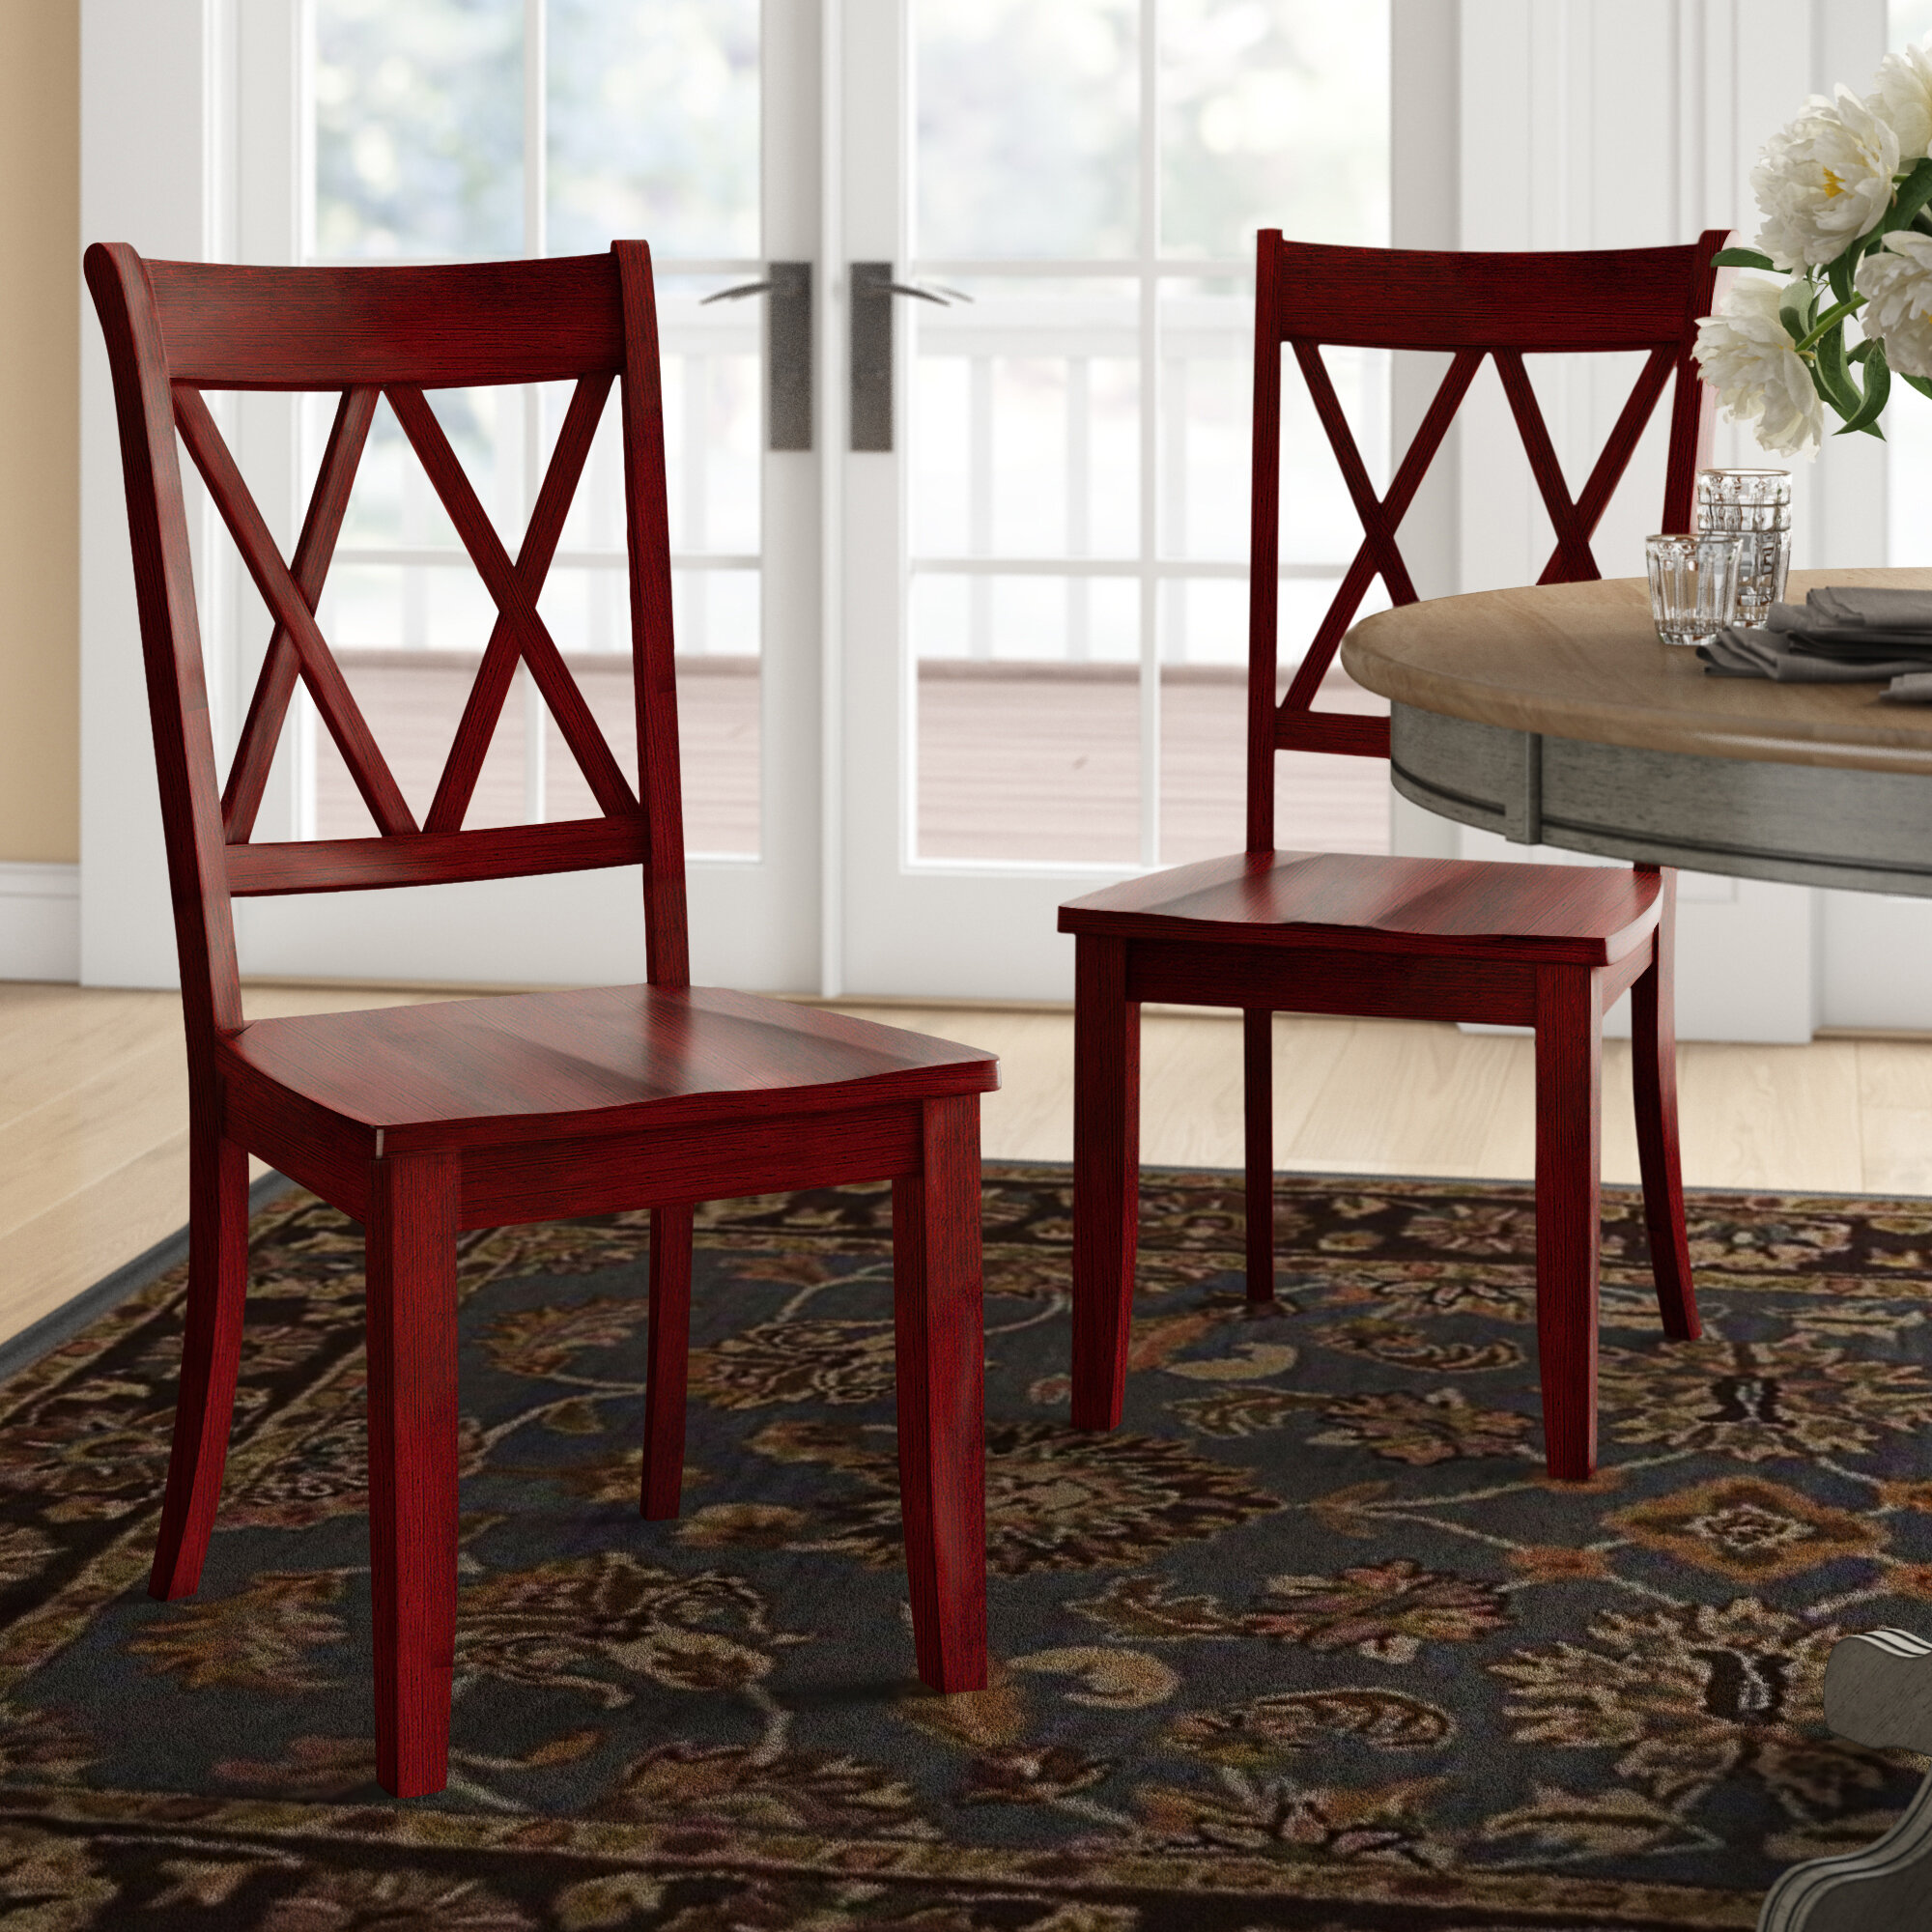 Set of 4 Red Leather Rooms To Go Dining Room Side Chairs w